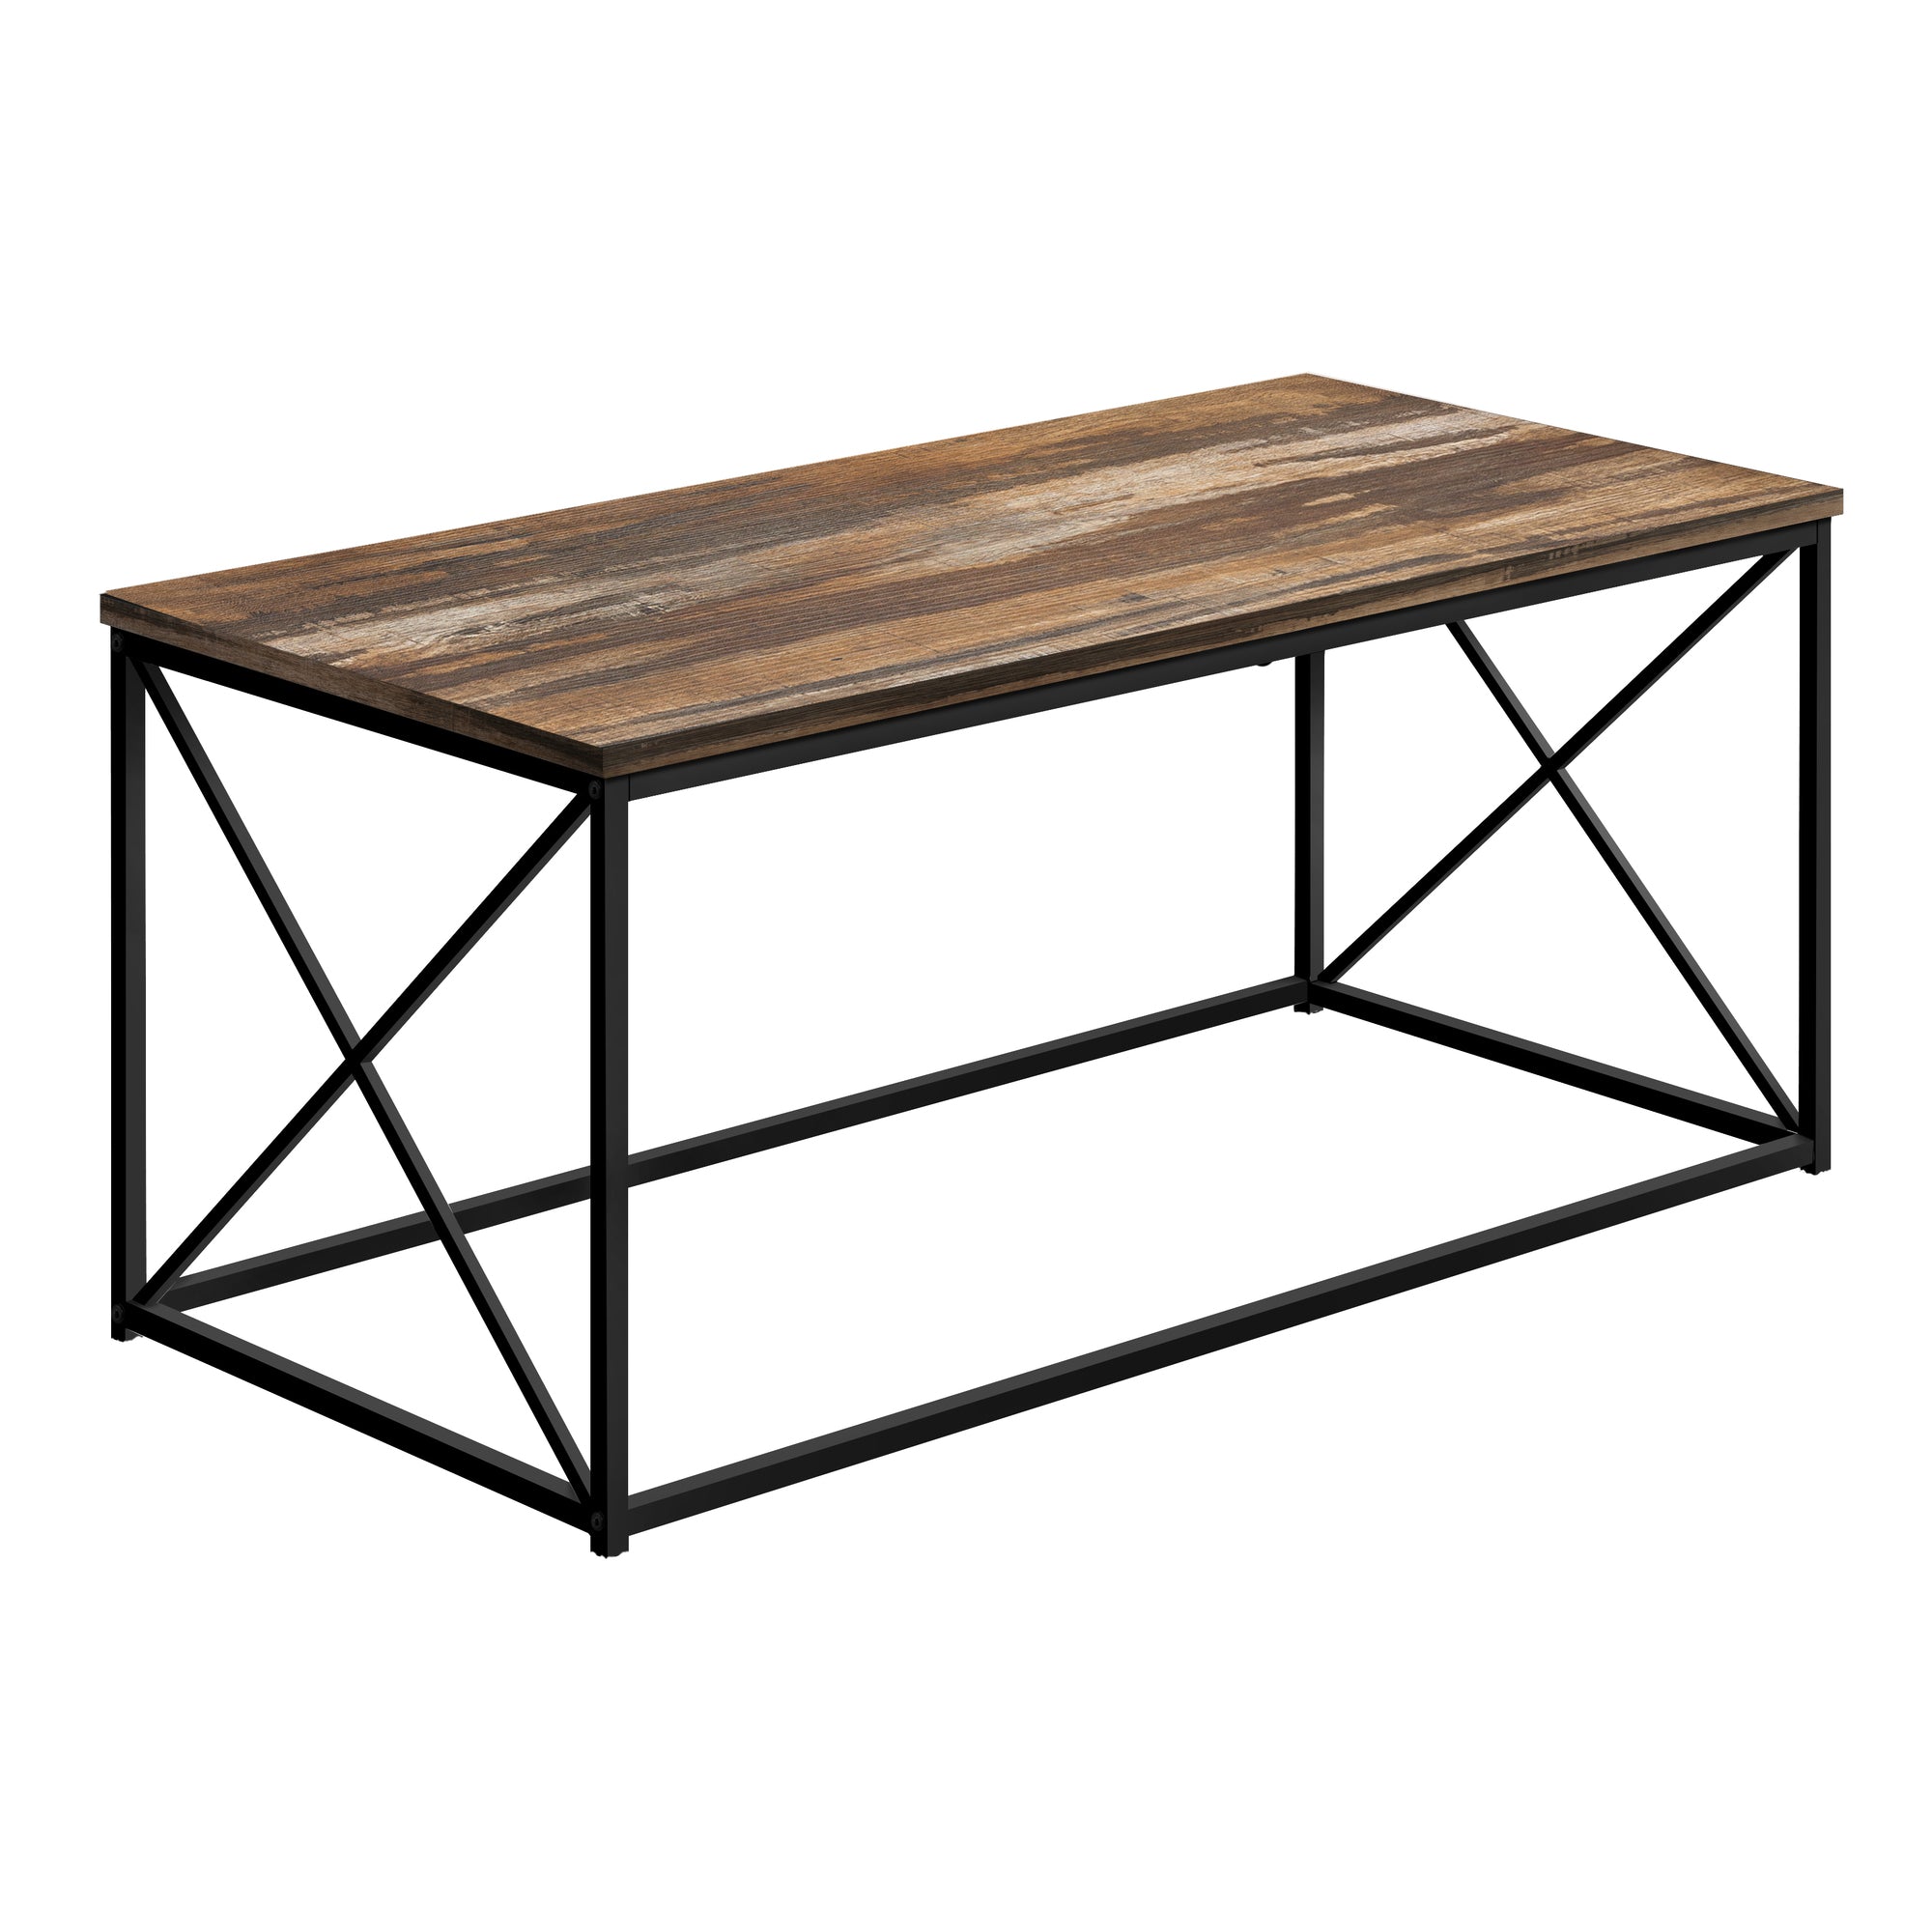 MN-573784    Coffee Table - Rectangular / Metal Base With X-Shaped Sides - 40"L - Medium Brown Reclaimed Wood-Look  / Black